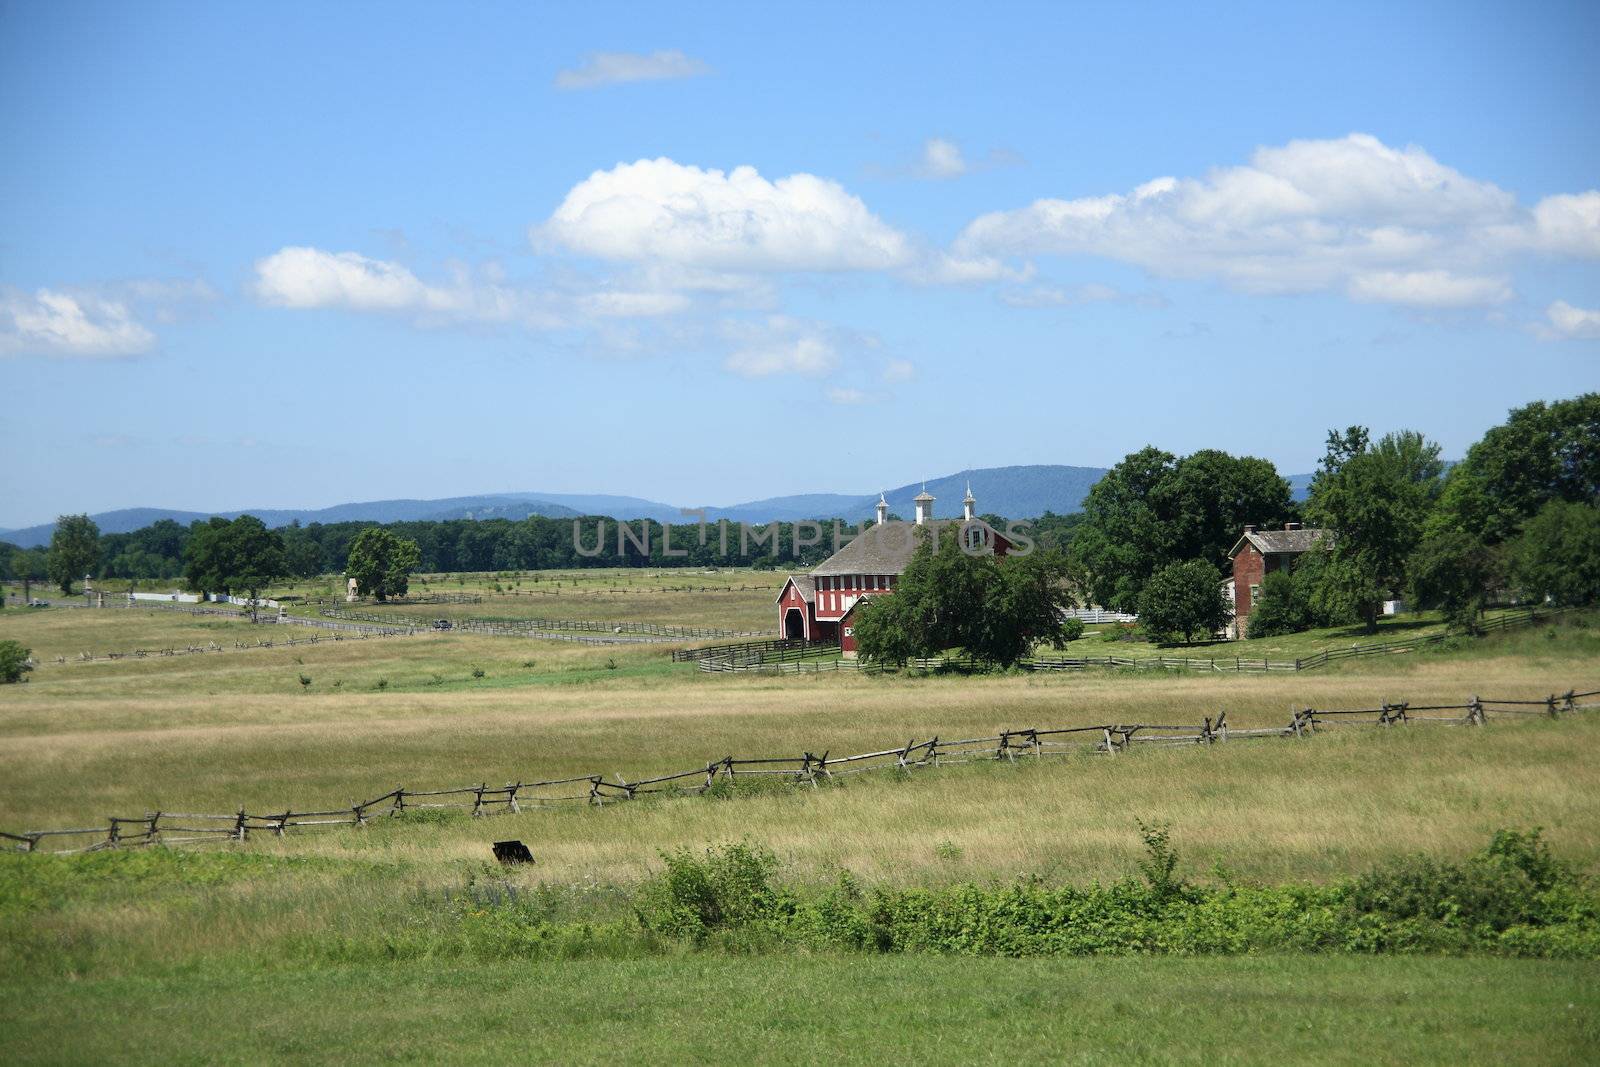 Farm and fences on battle site, as seen from Cemetery Ridge at Gettysburg National Military Park